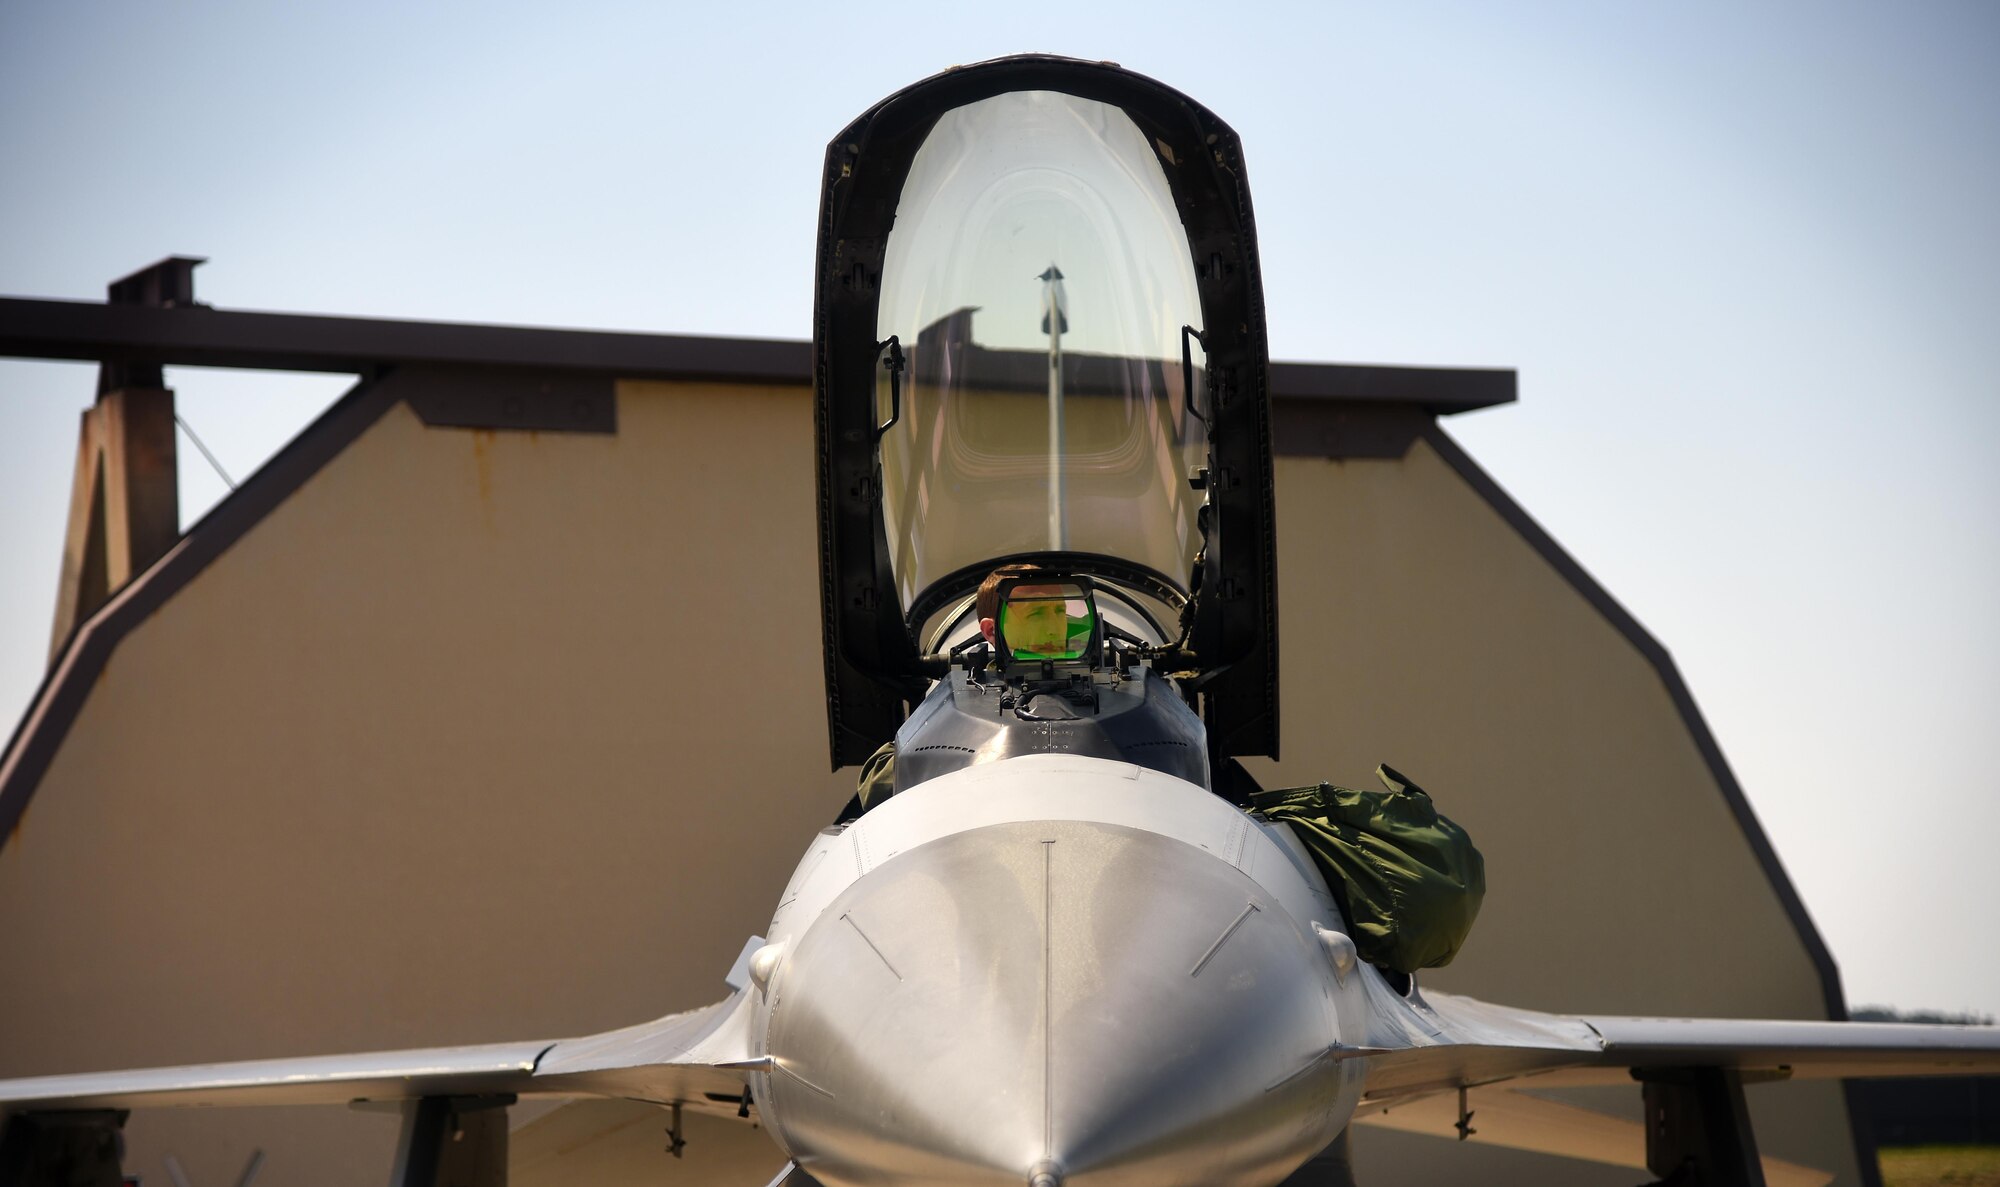 U.S. Air Force 1st Lt. Glenn Miltenberg, 35th Fighter Squadron pilot, buckles himself into the cockpit of an F-16 Fighting Falcon during Exercise MAX THUNDER 17 at Kunsan Air Base, Republic of Korea, April 27, 2017. This large-scale employment exercise increases the U.S. and ROK’s ability to work together shoulder-to-shoulder and ultimately enhances the U.S. and ROK capability to maintain peace in the region. (U.S. Air Force photo by Tech. Sgt. Jeff Andrejcik/Released)